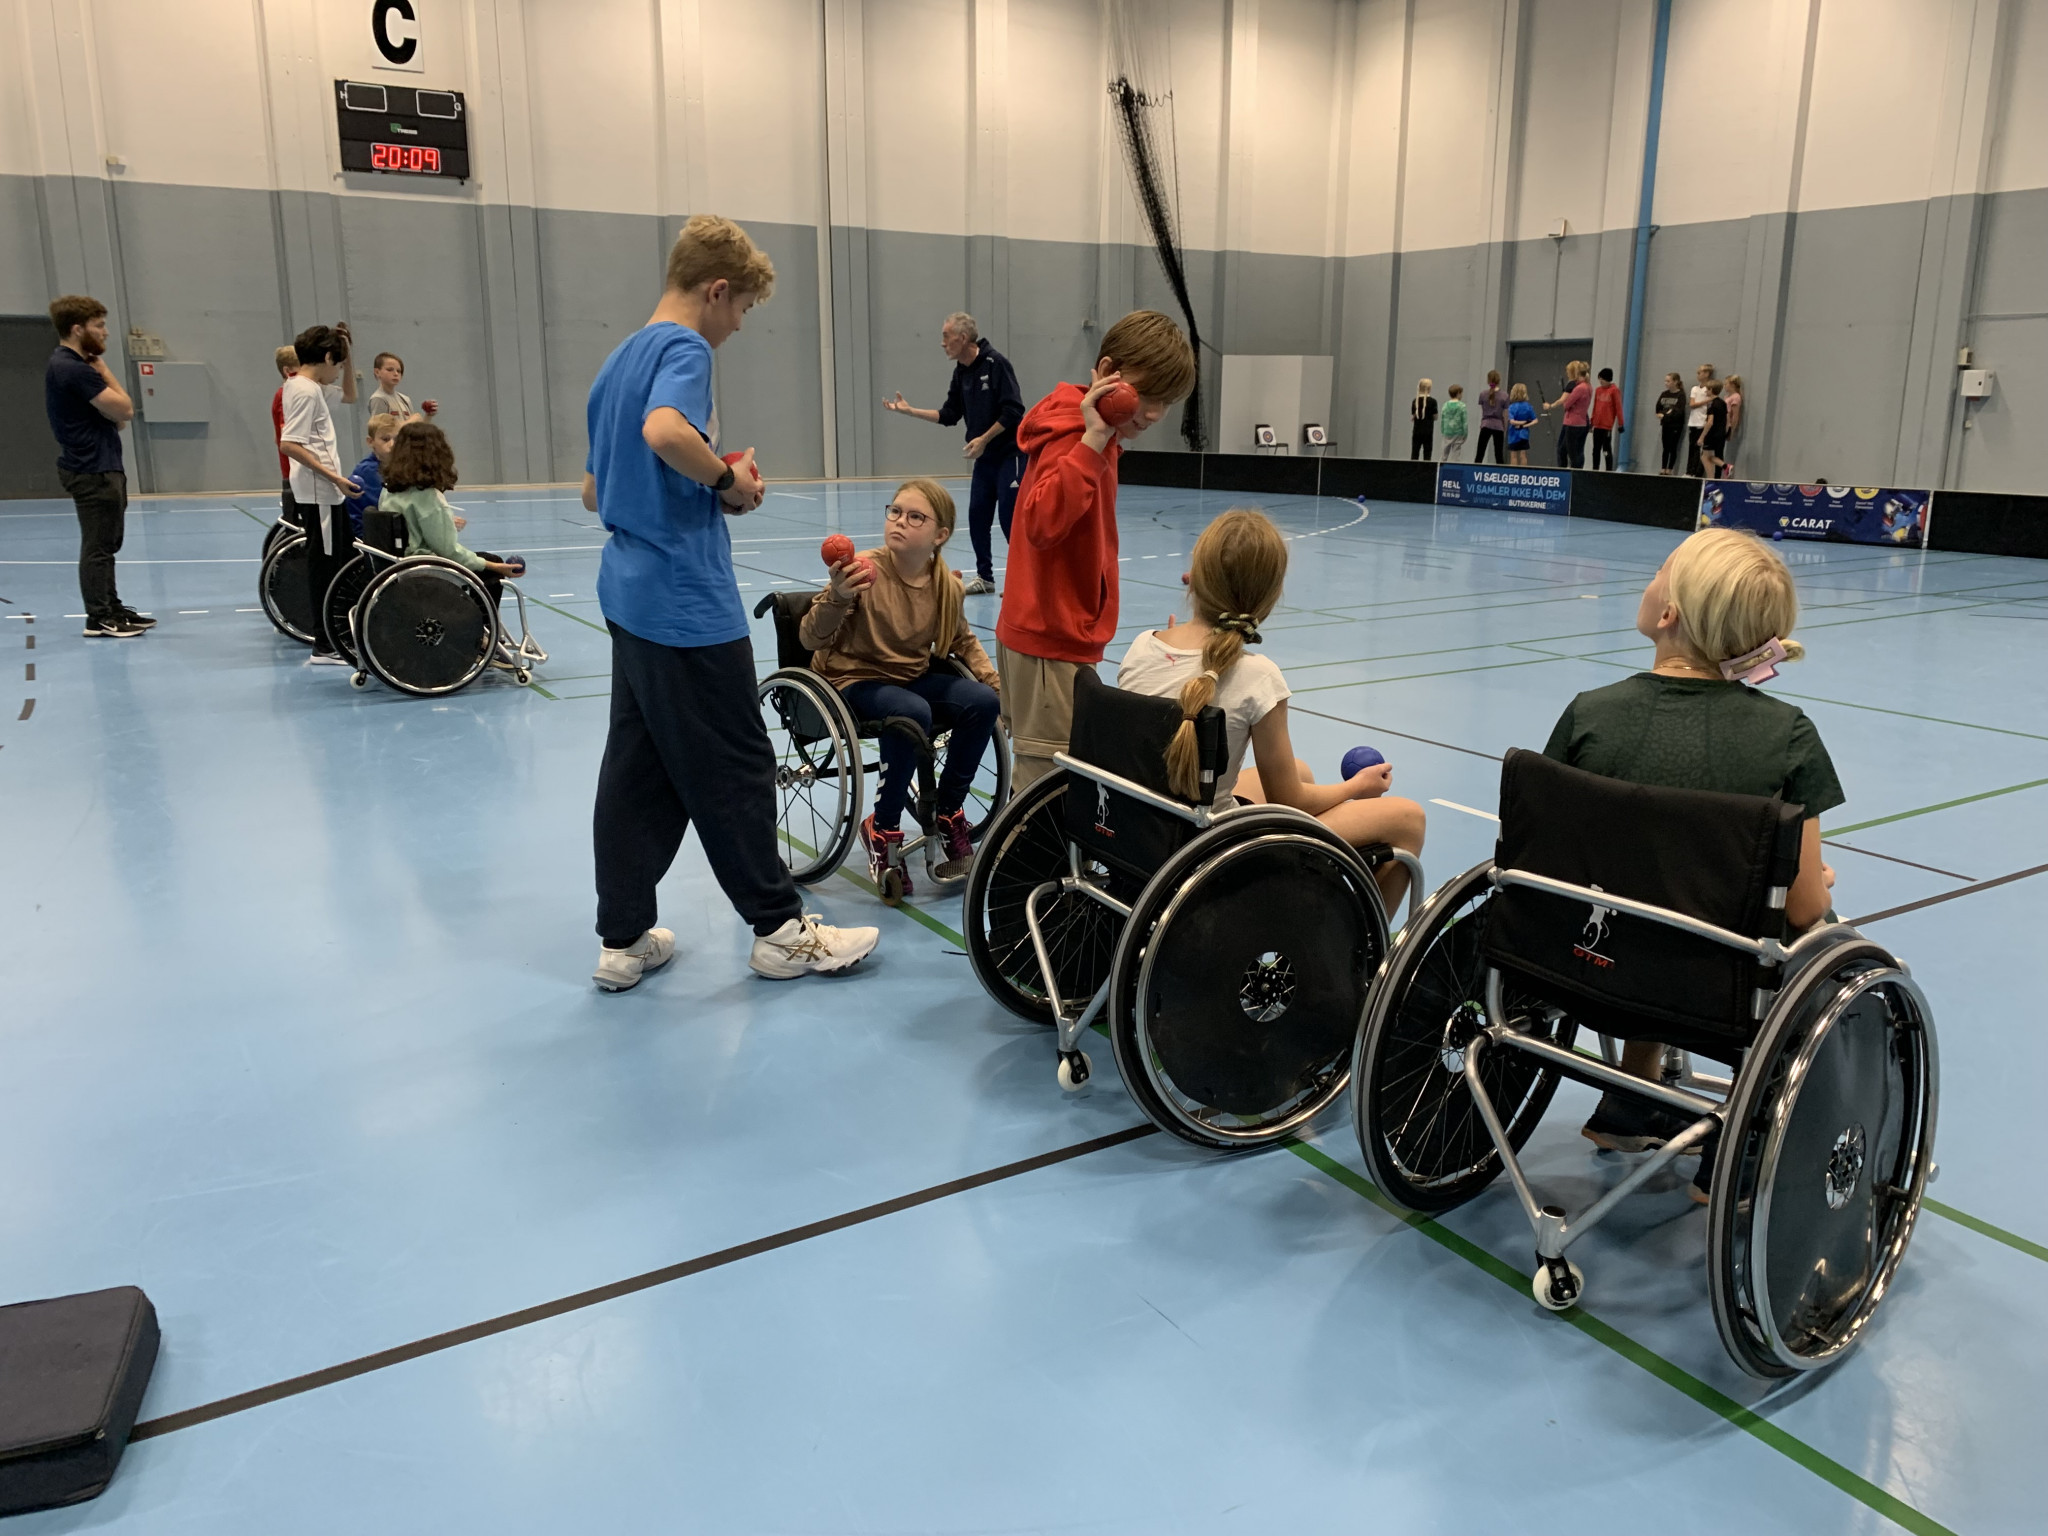 Danish children in Vejle take part in Para sport at school, even if they may not have a disability ©Vejle Municipality 